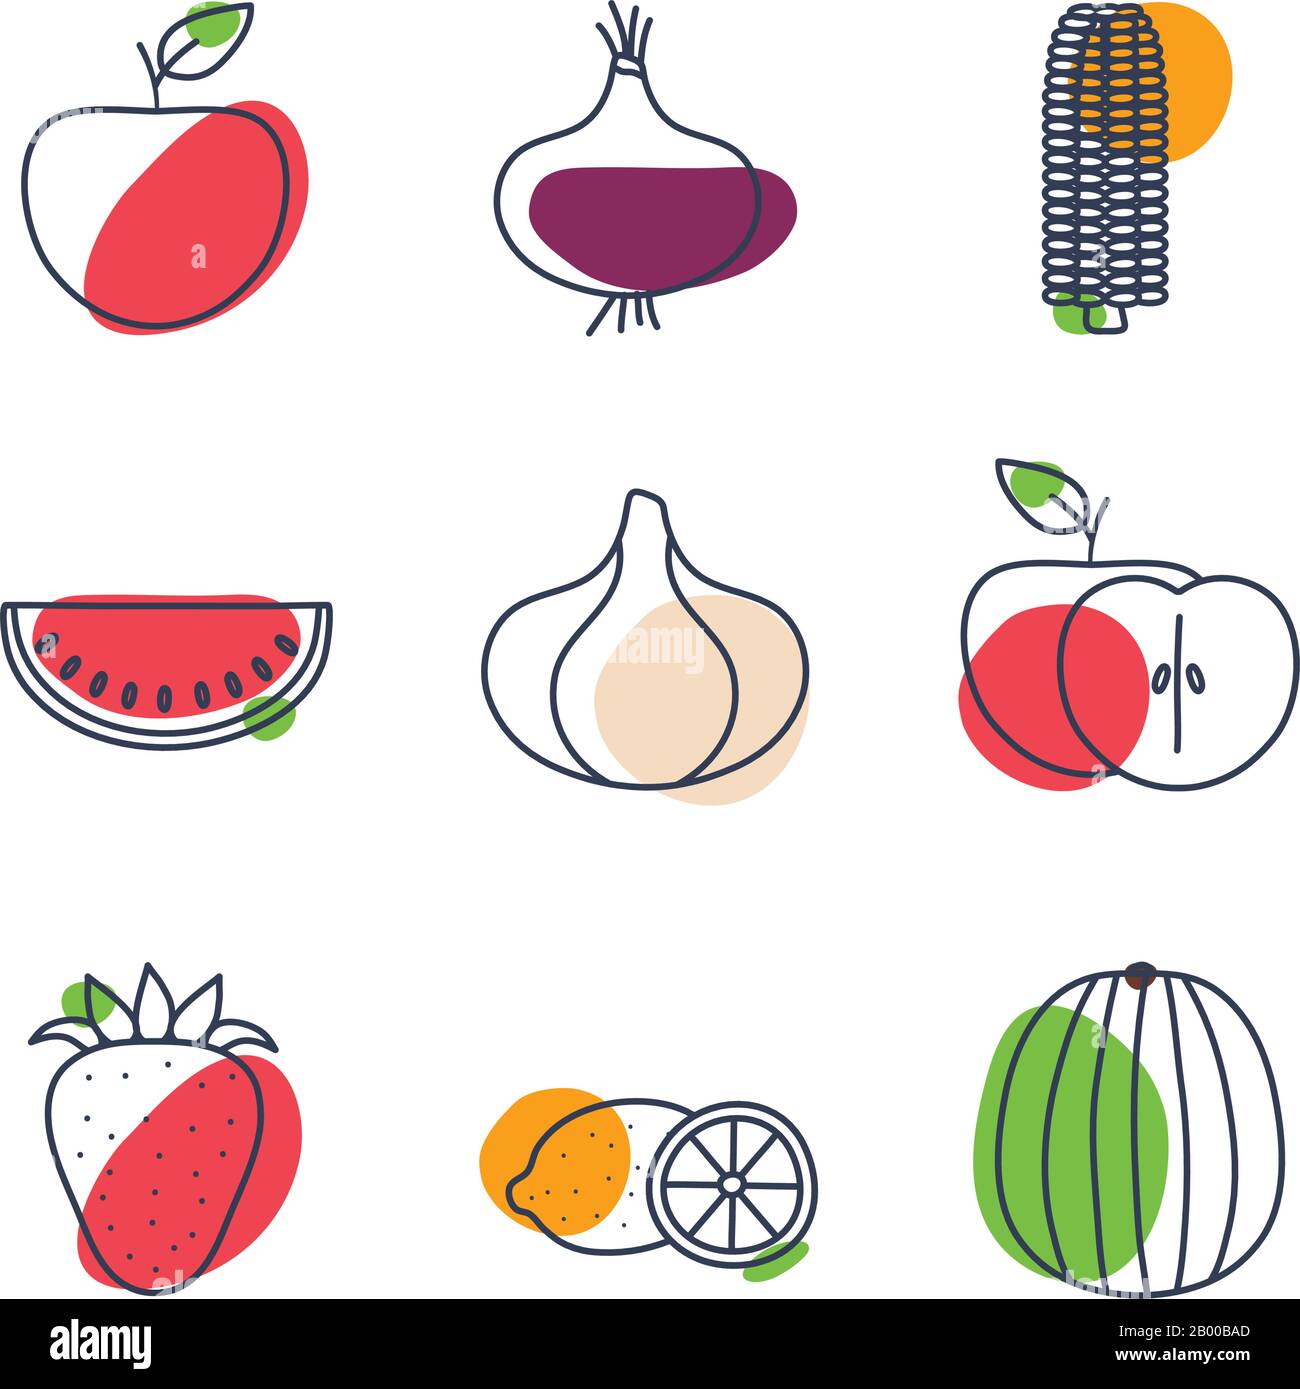 Vector Illustration Of A Fruit And Healthy Food Elements Stock Illustration  - Download Image Now - iStock